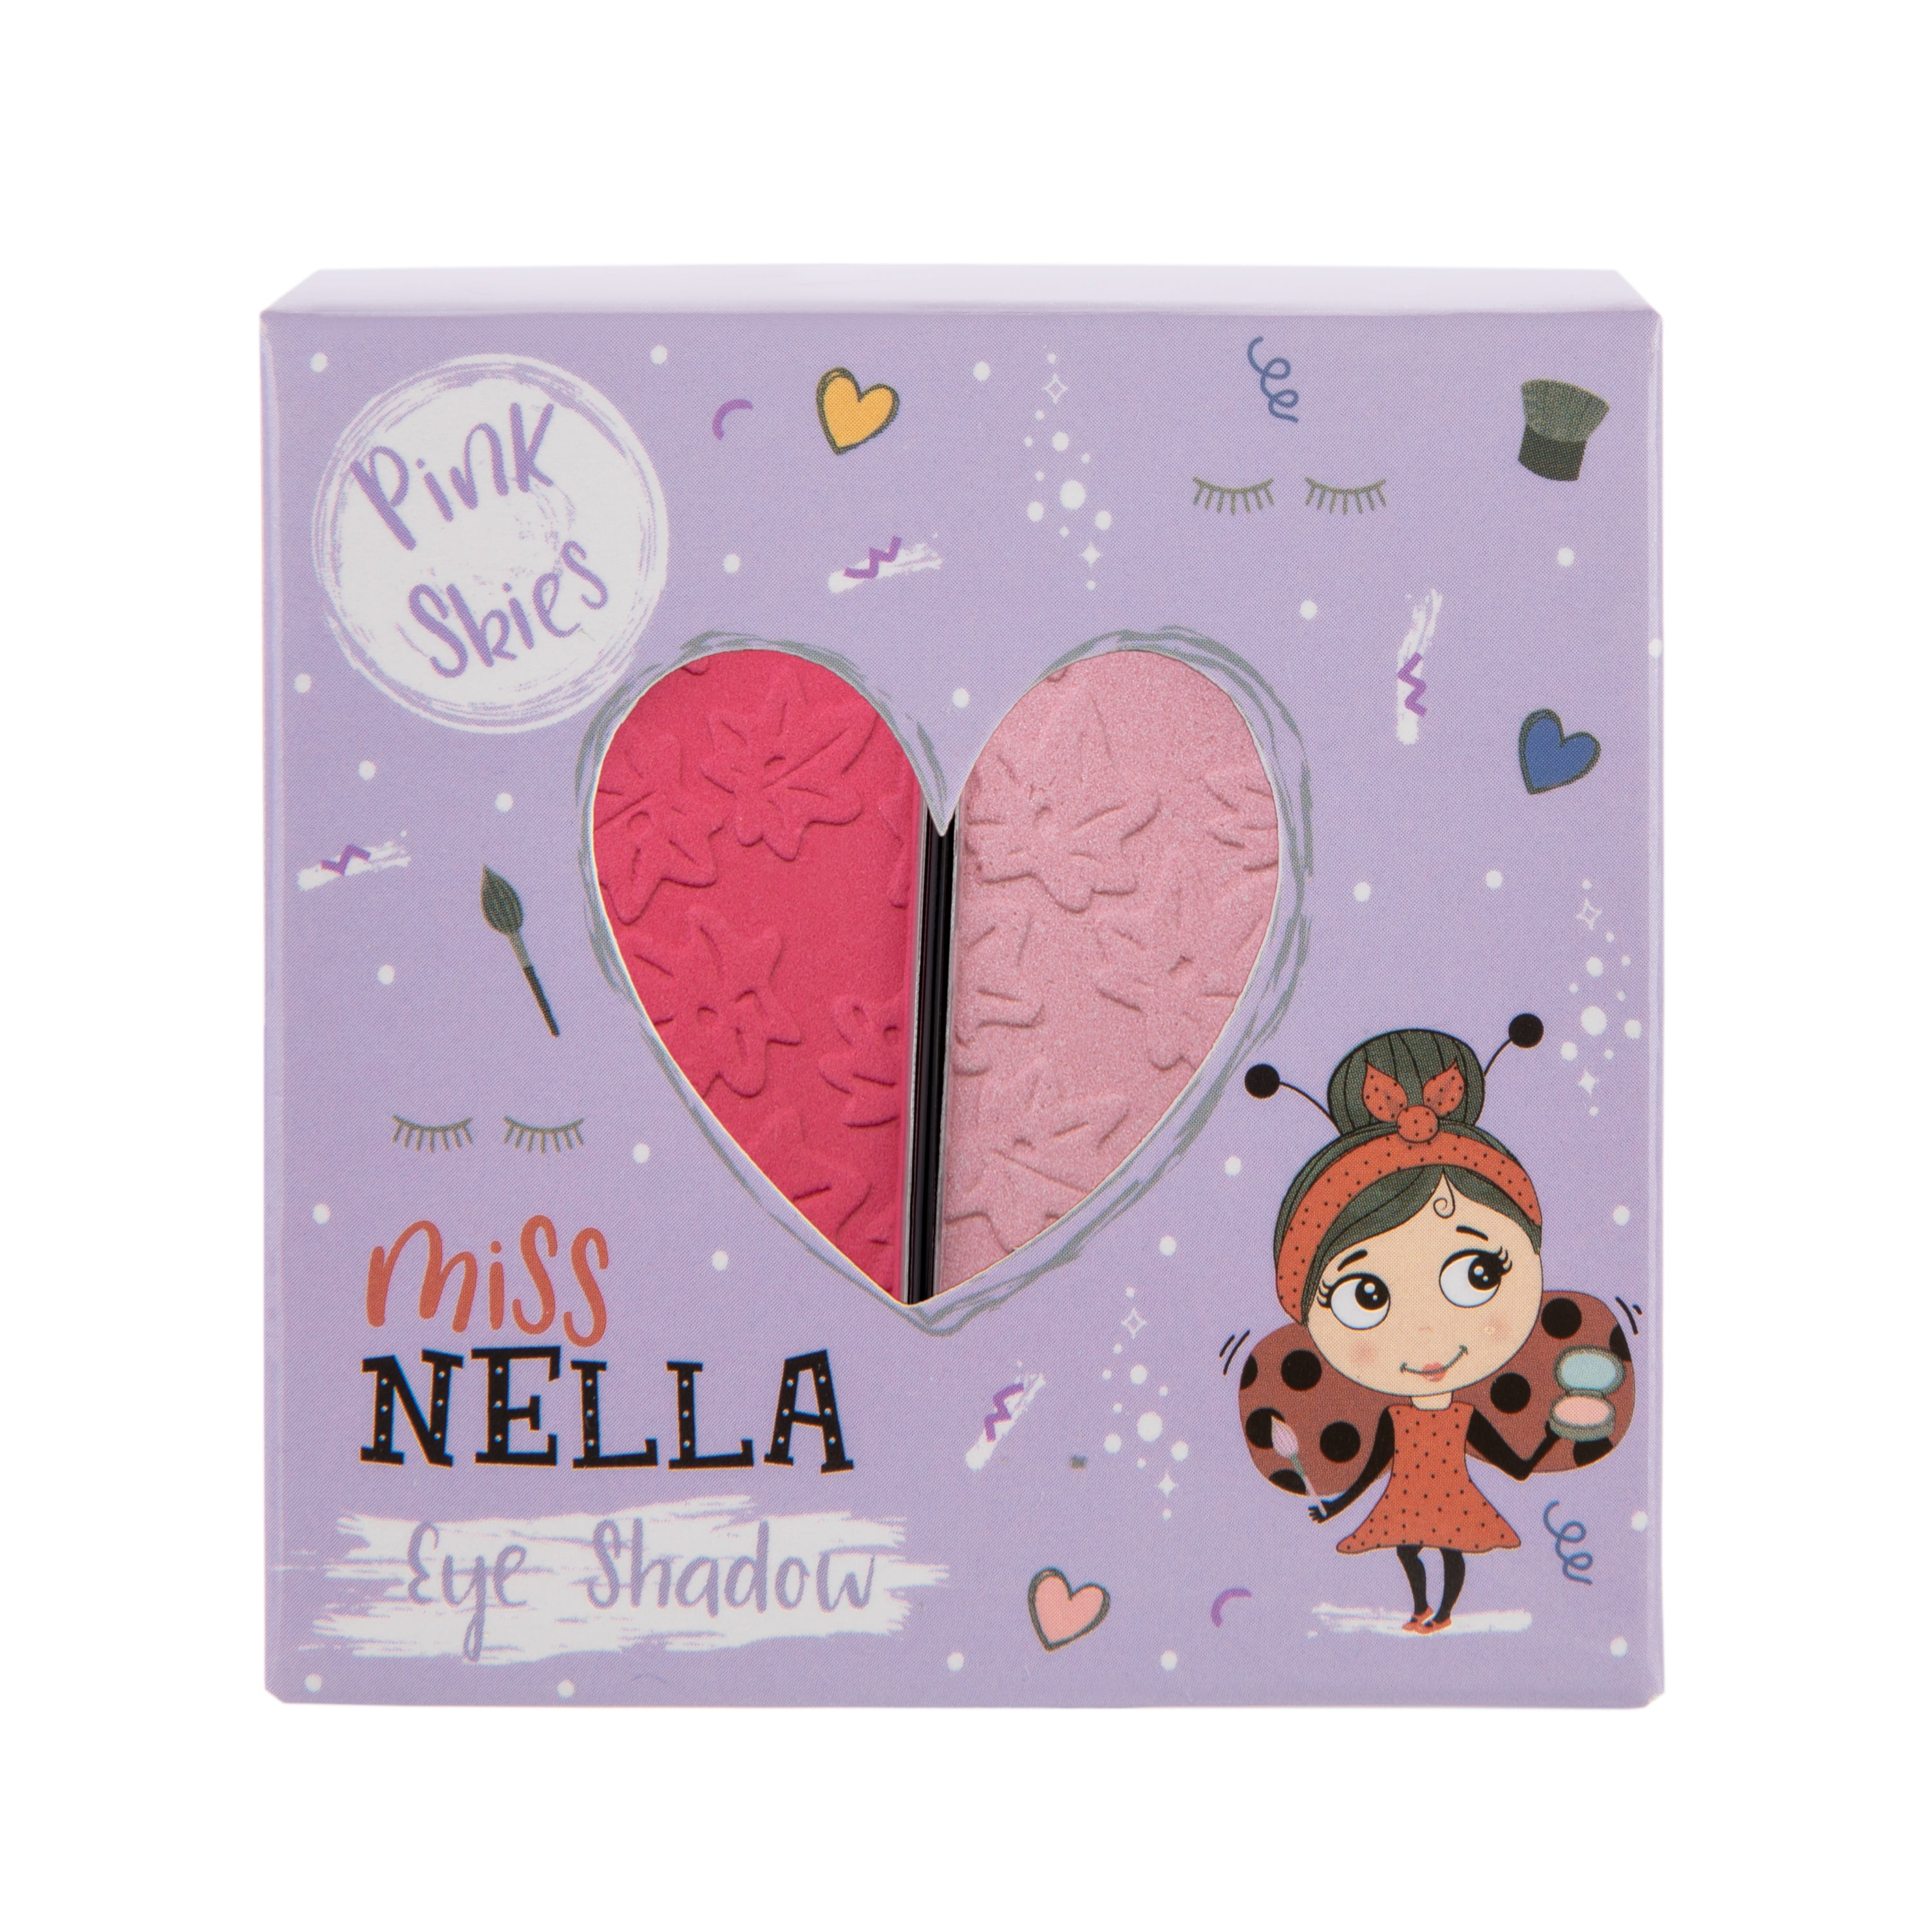 Special Edition Kids Fashion Bag of Wonders - Miss Nella